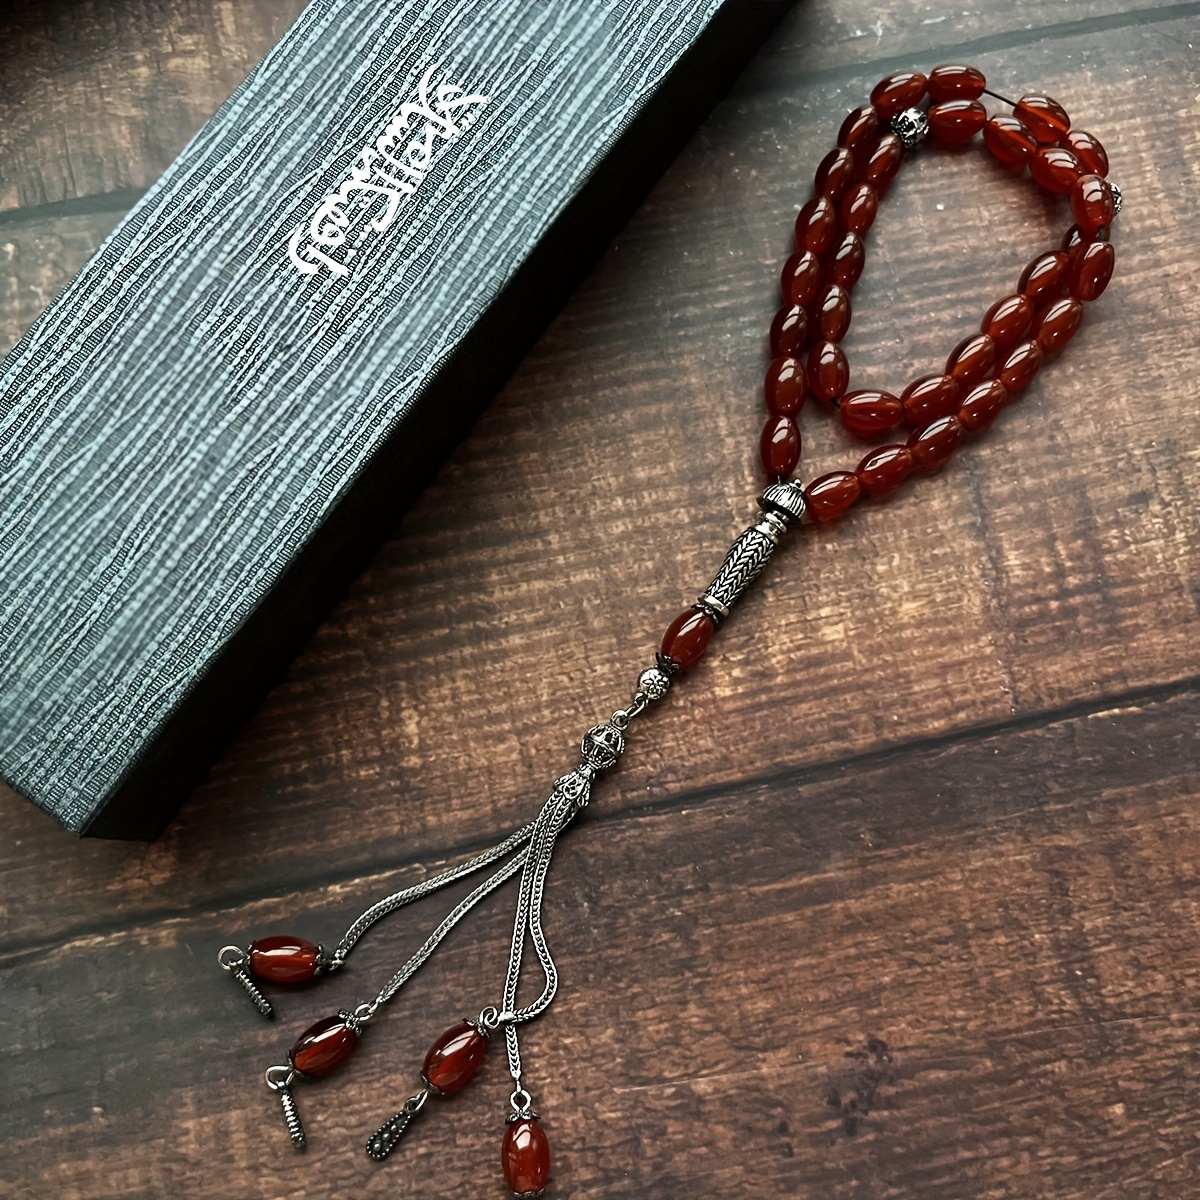 

Handcrafted Red Agate Tasbih Rosary - 33 Natural Beads, Vintage Ethnic Style, Protection Jewelry For Women, Perfect Ramadan Gift With Elegant Box